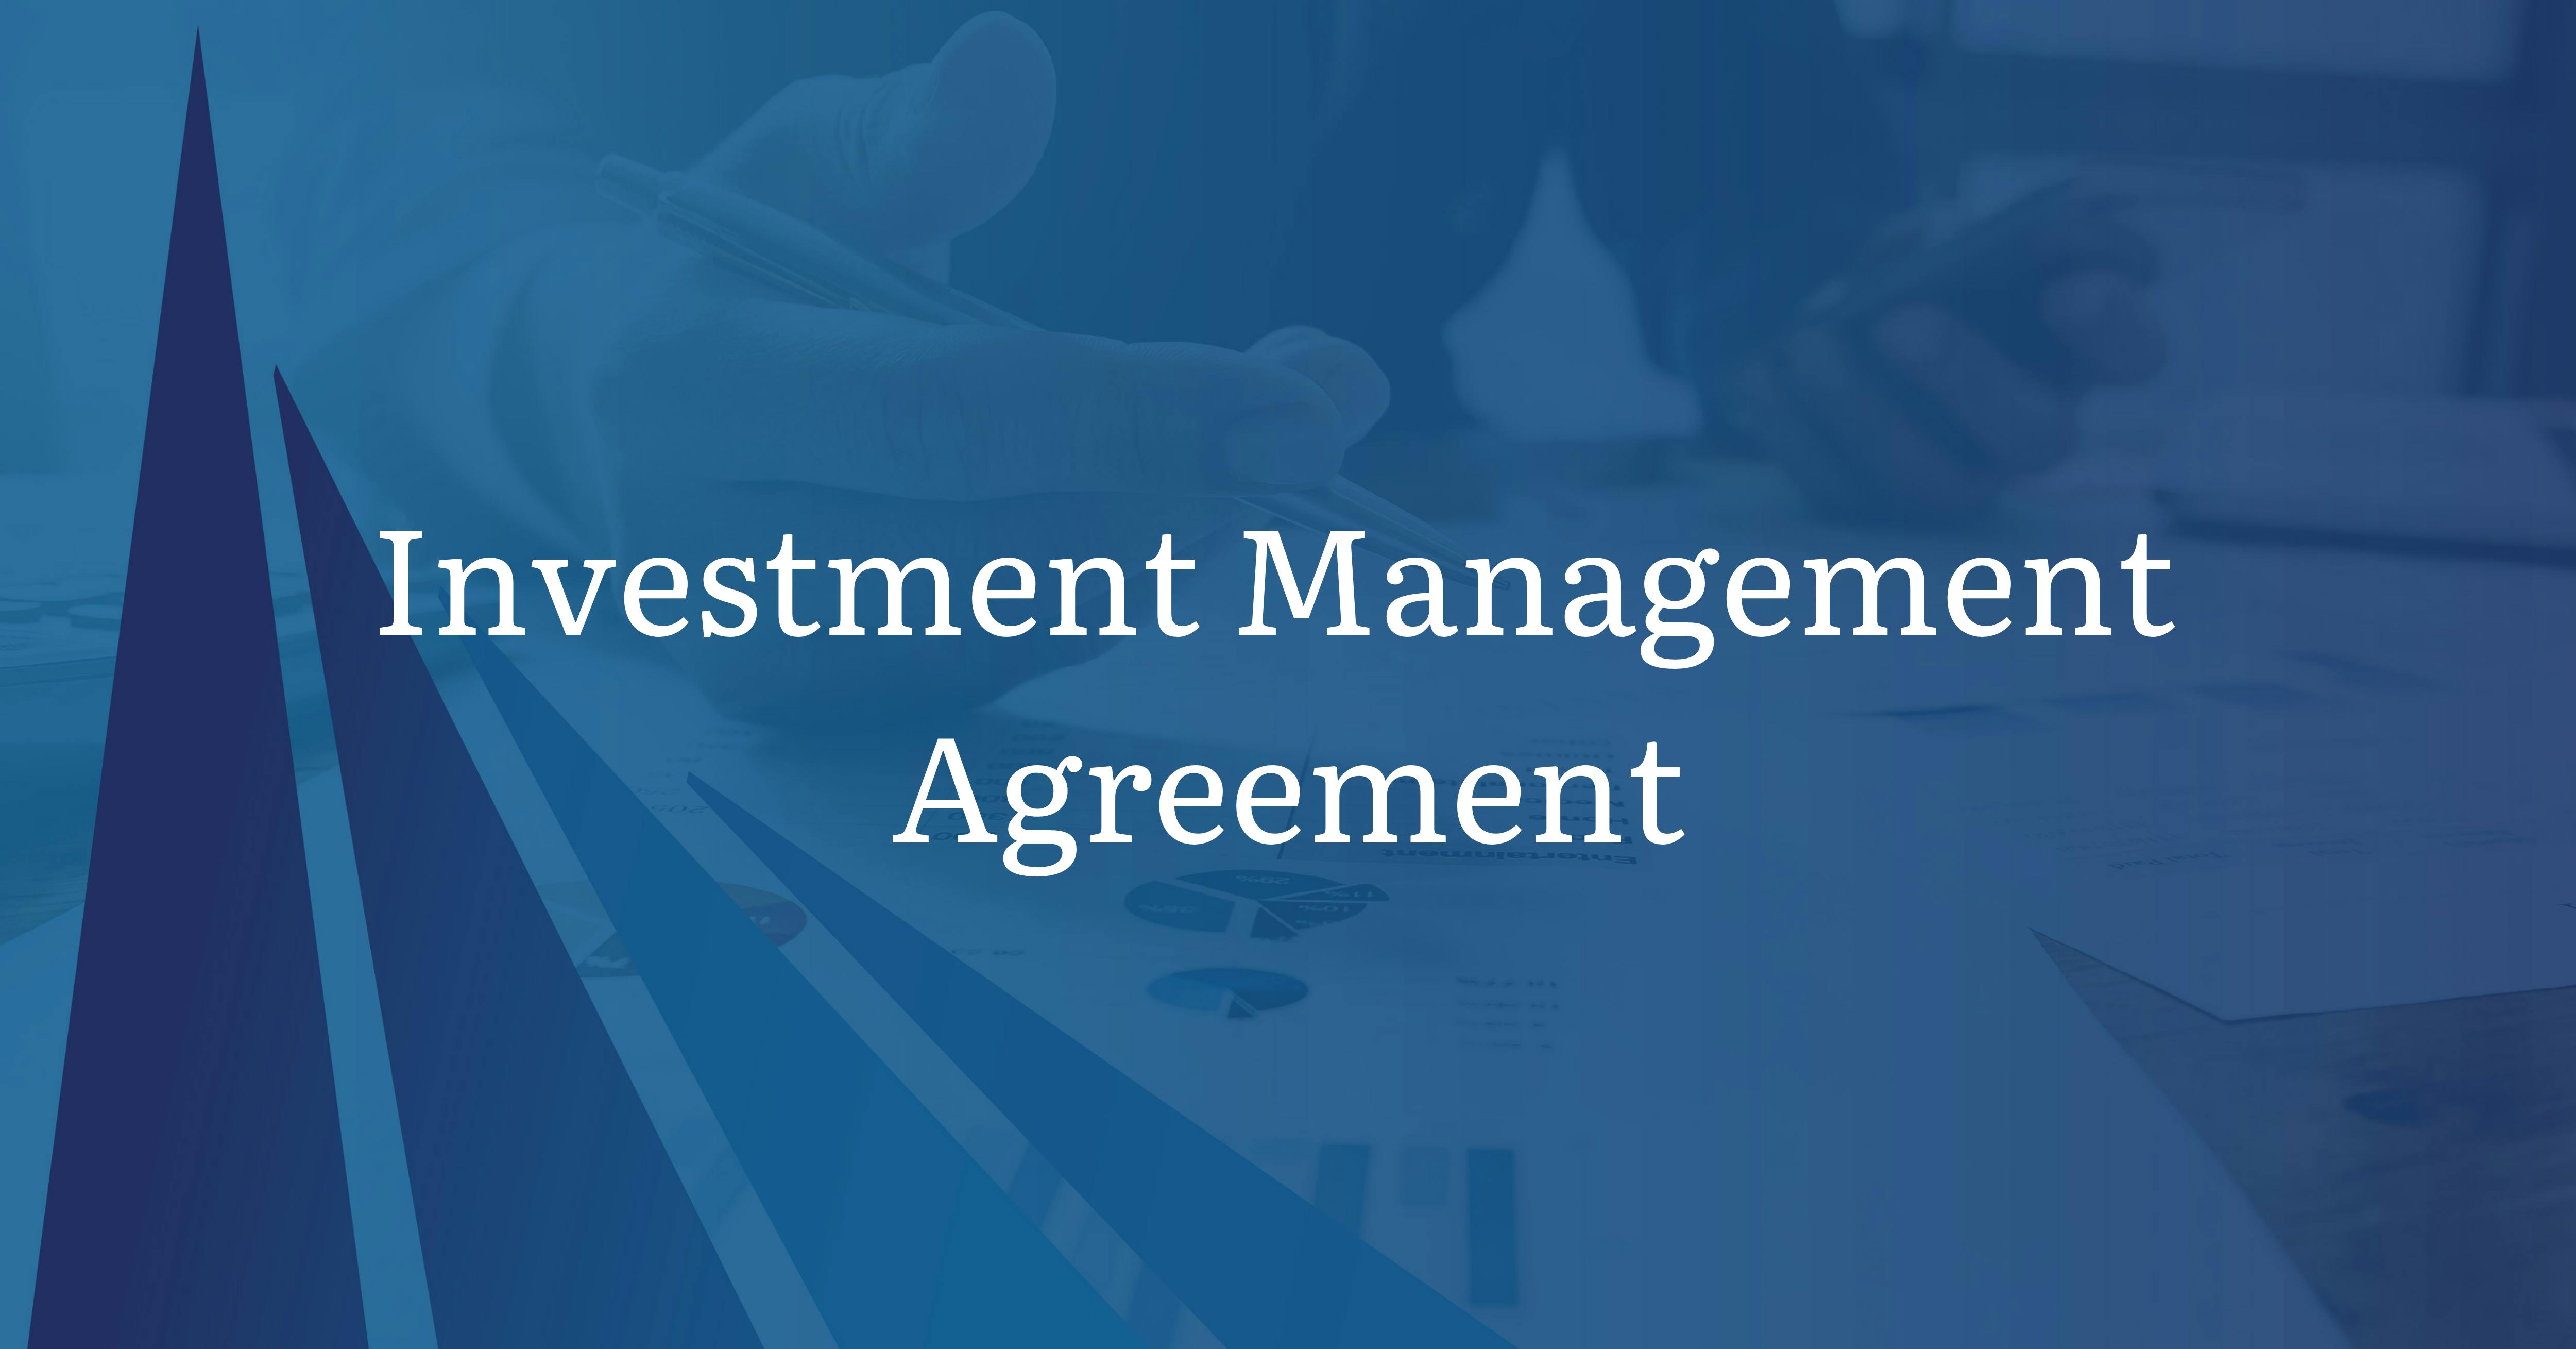 Investment Only Advisory Agreement